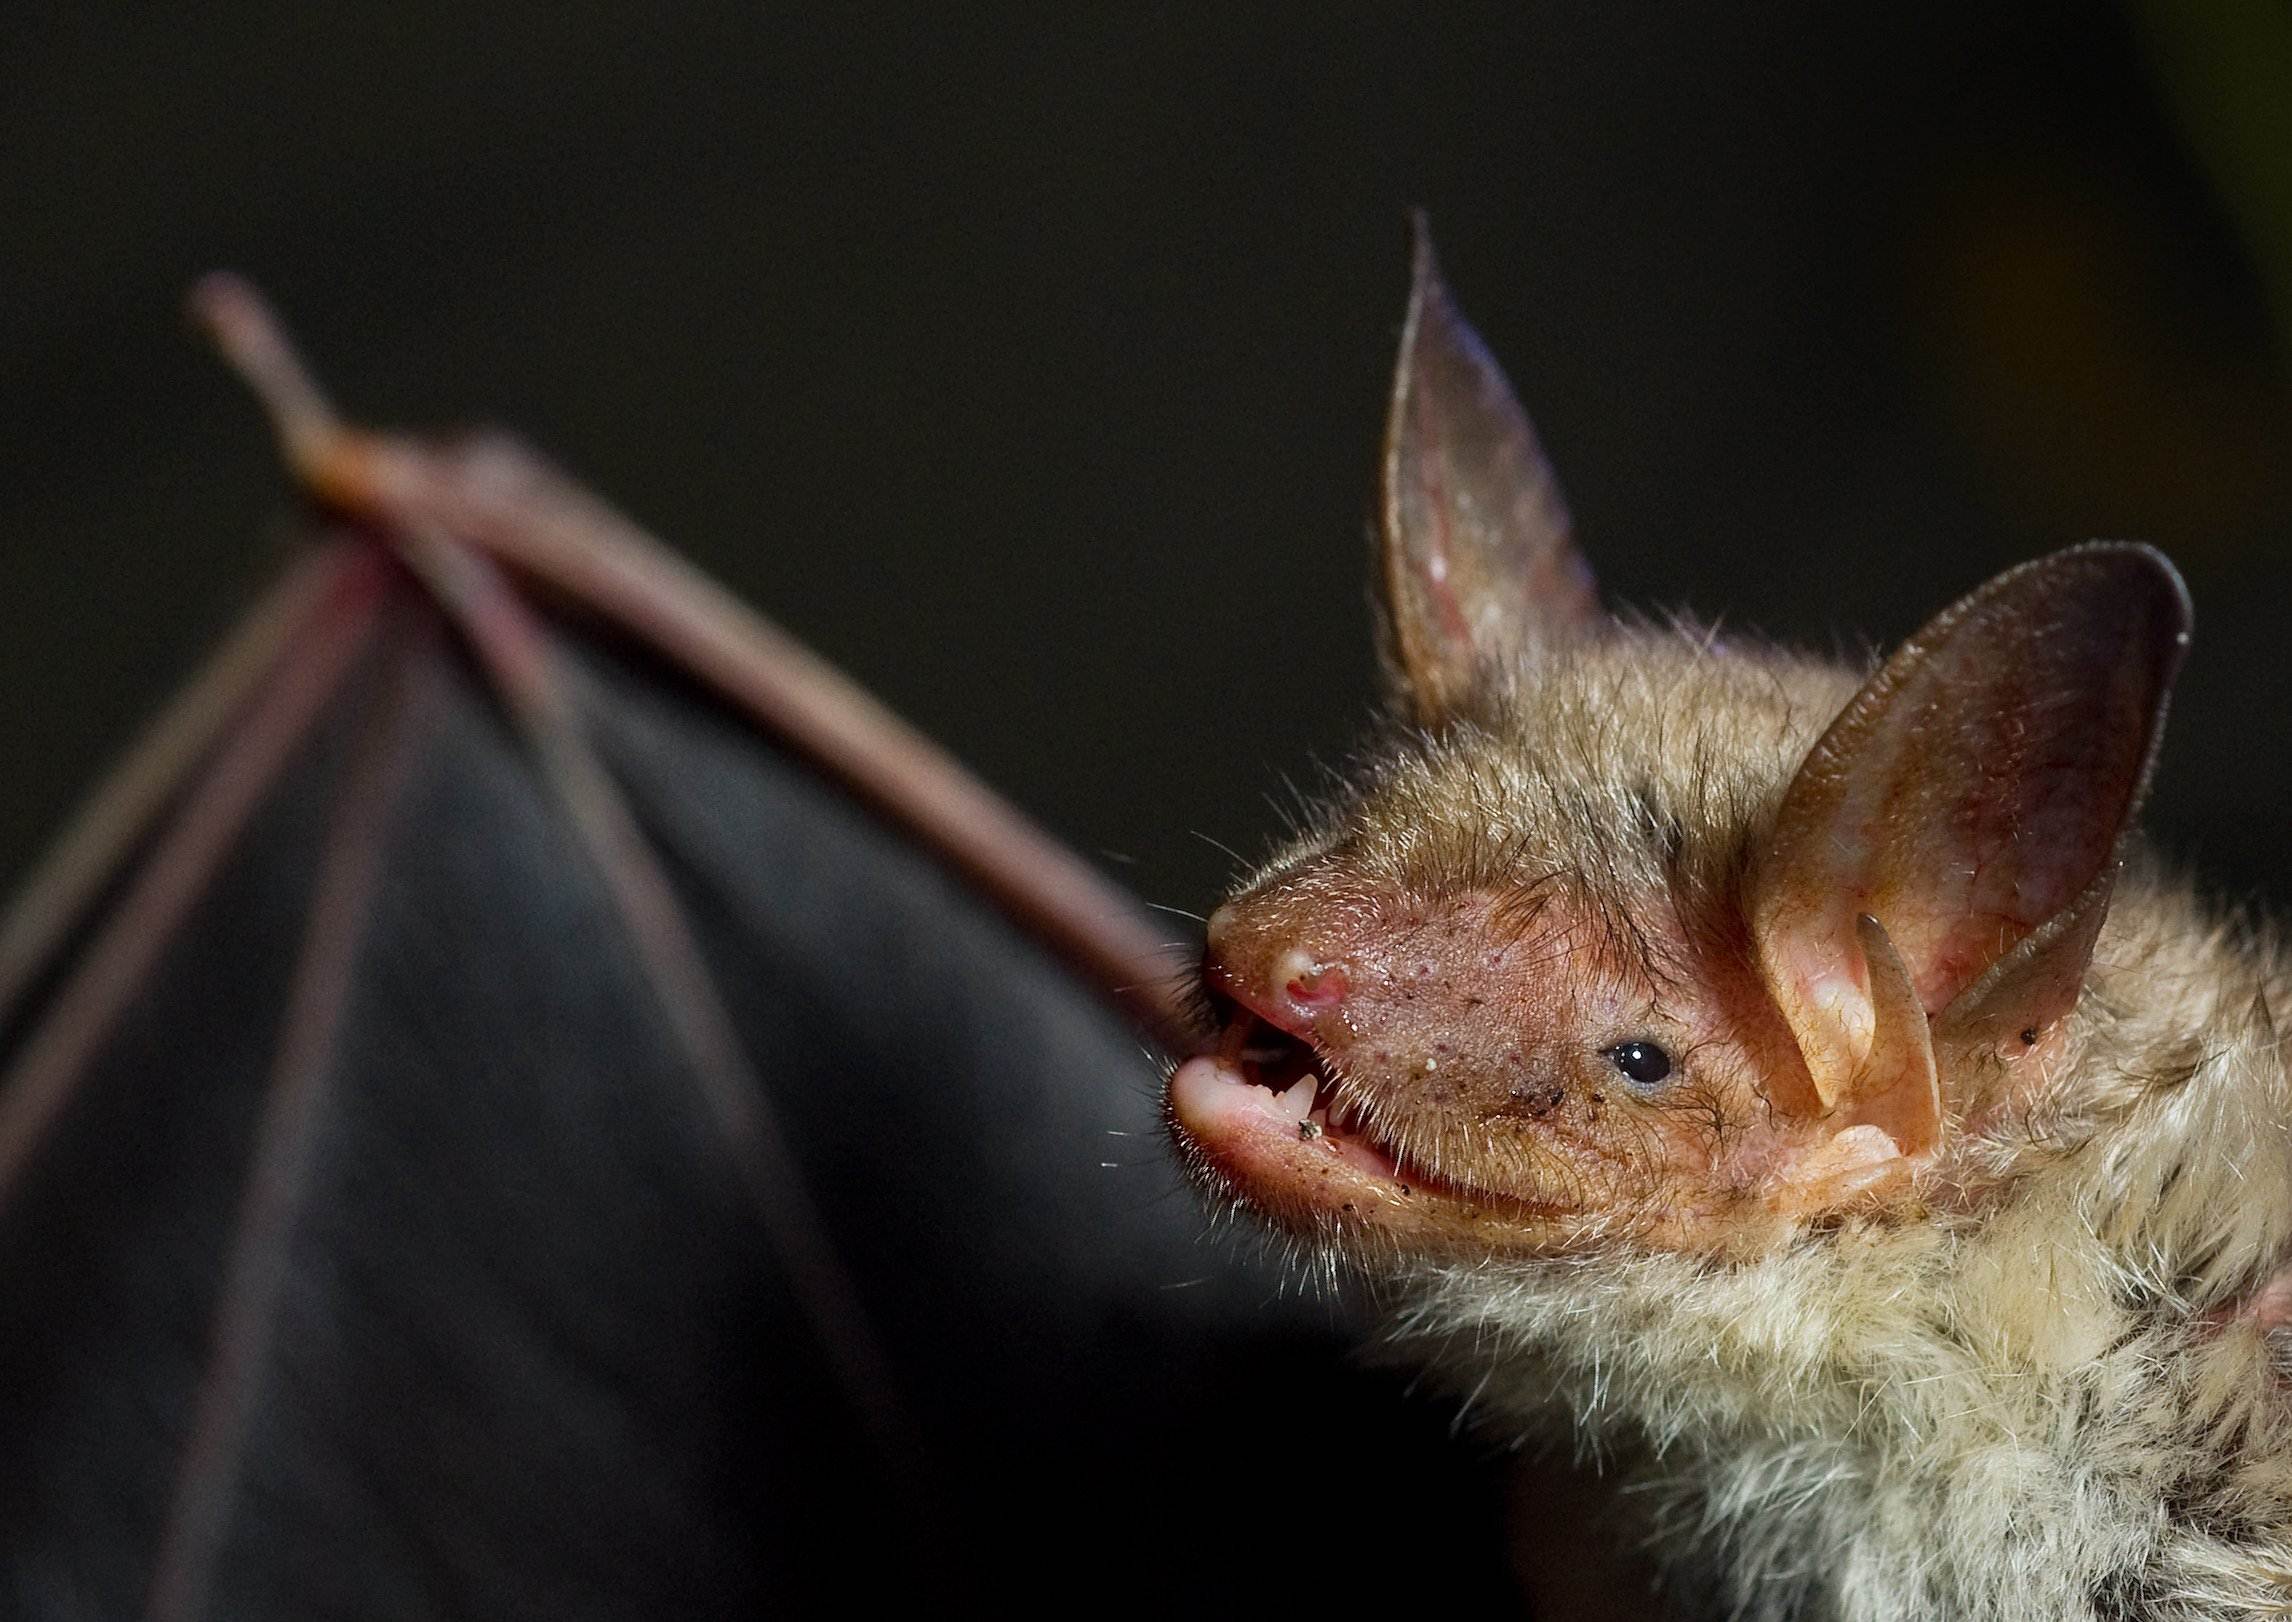 A greater mouse-eared bat is pictured on